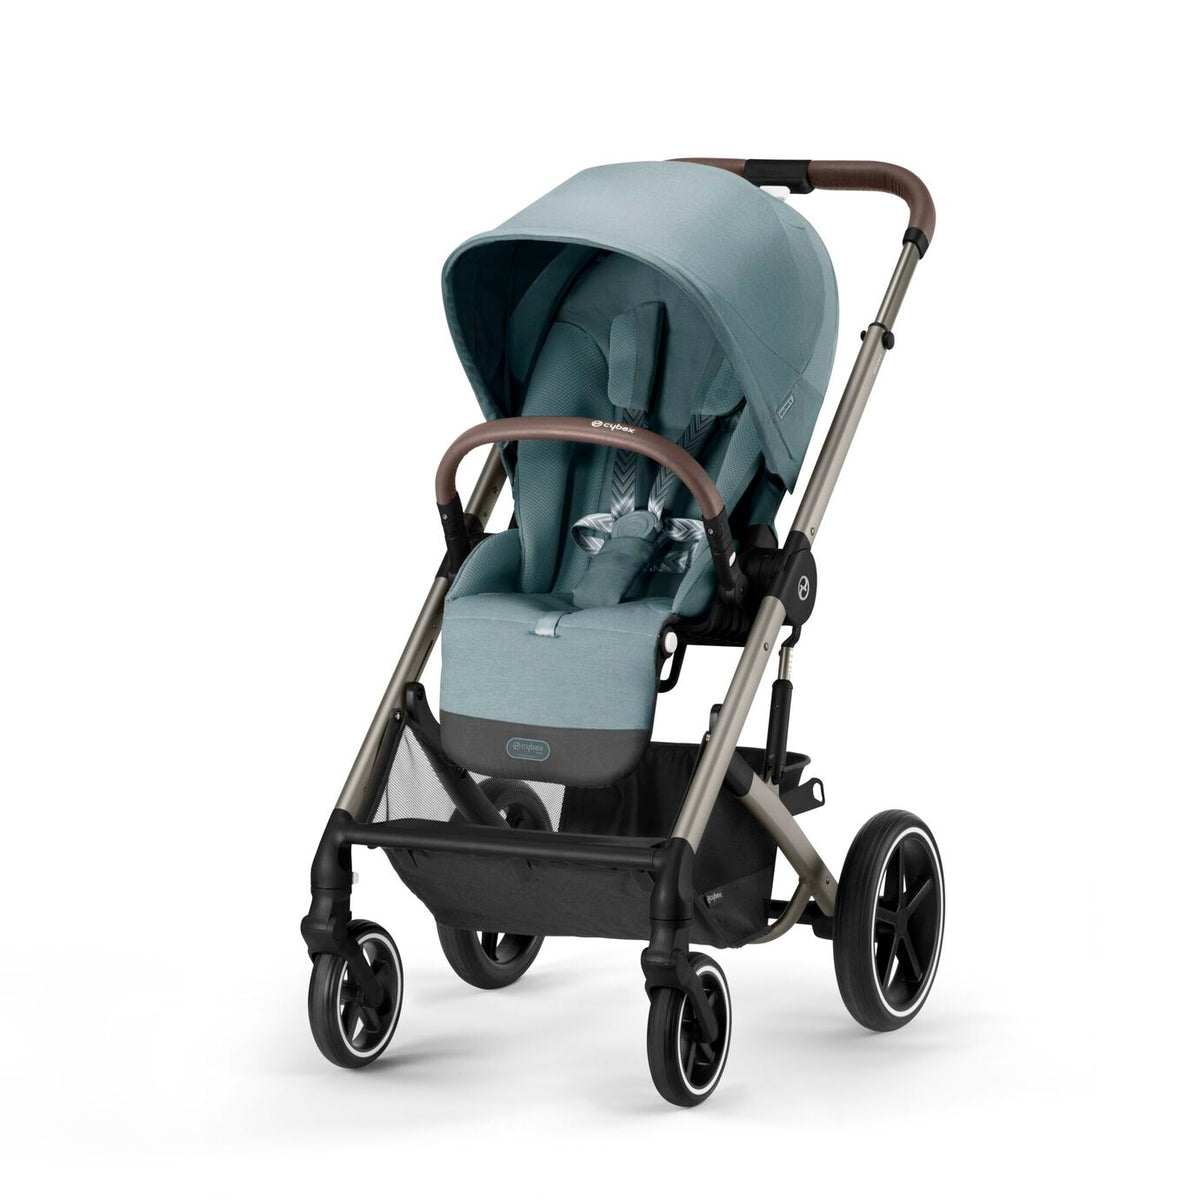 Cybex Balios S Lux Black Chassis with Carrycot - River Blue